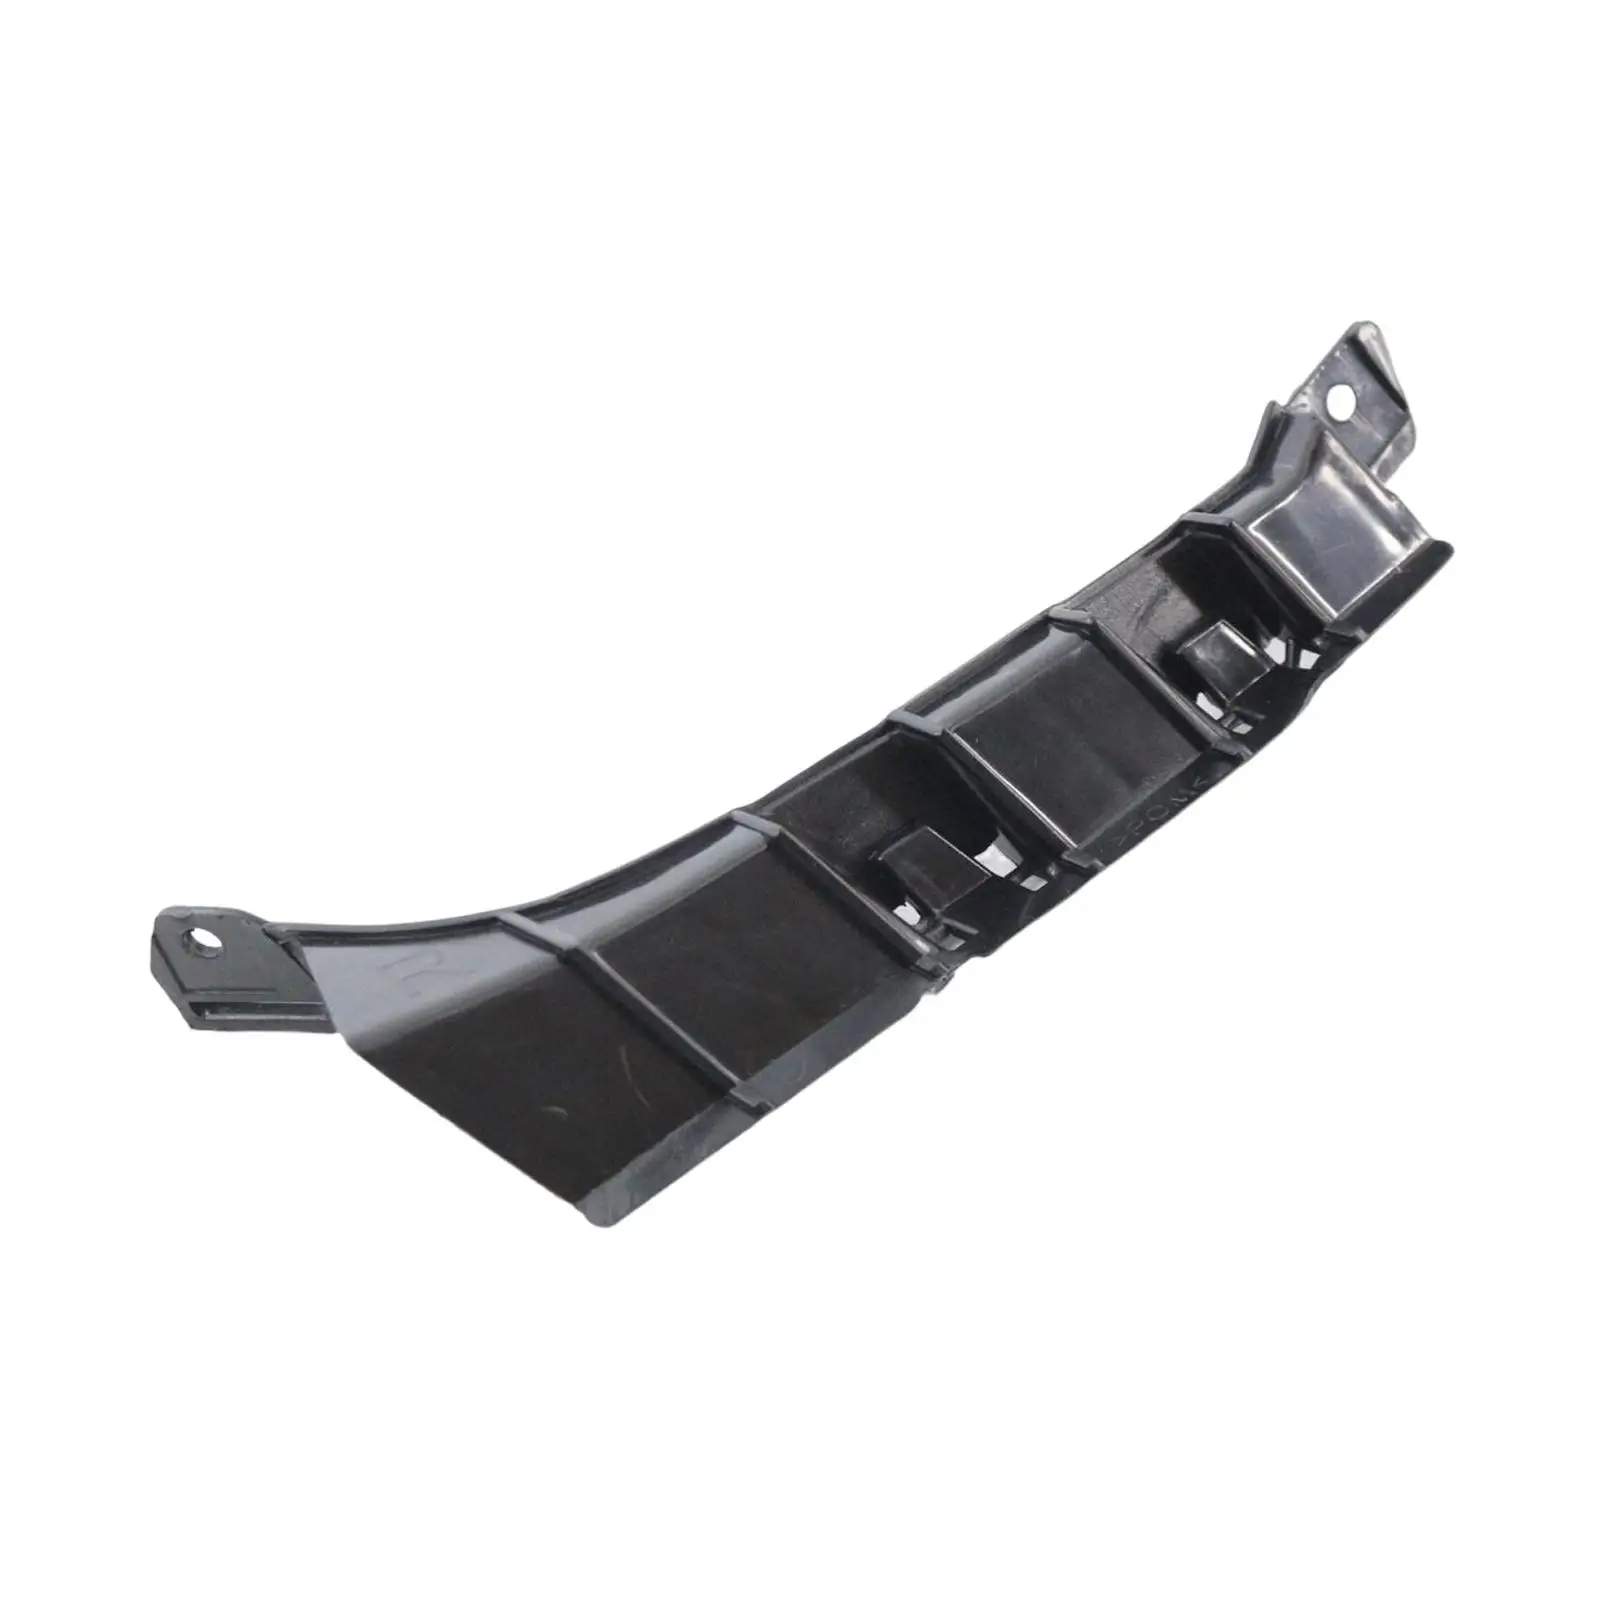 Car Front Bumper Bracket Holder Cover, Durable, Fit for x5 E53, Parts Replace Easy to Install